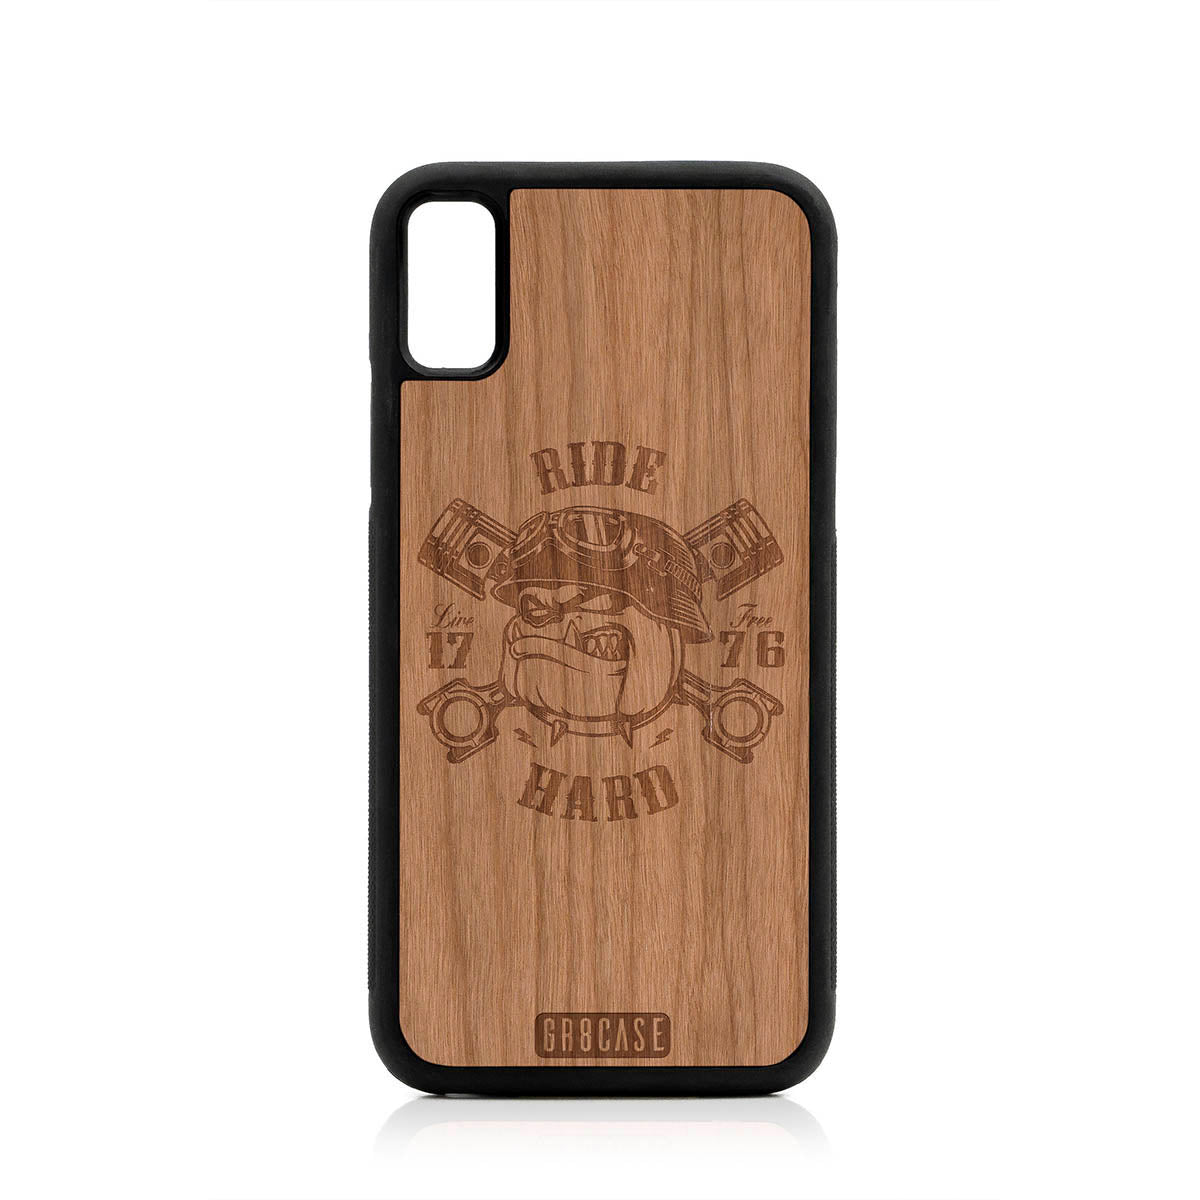 Ride Hard Live Free (Biker Dog) Design Wood Case For iPhone XS Max by GR8CASE